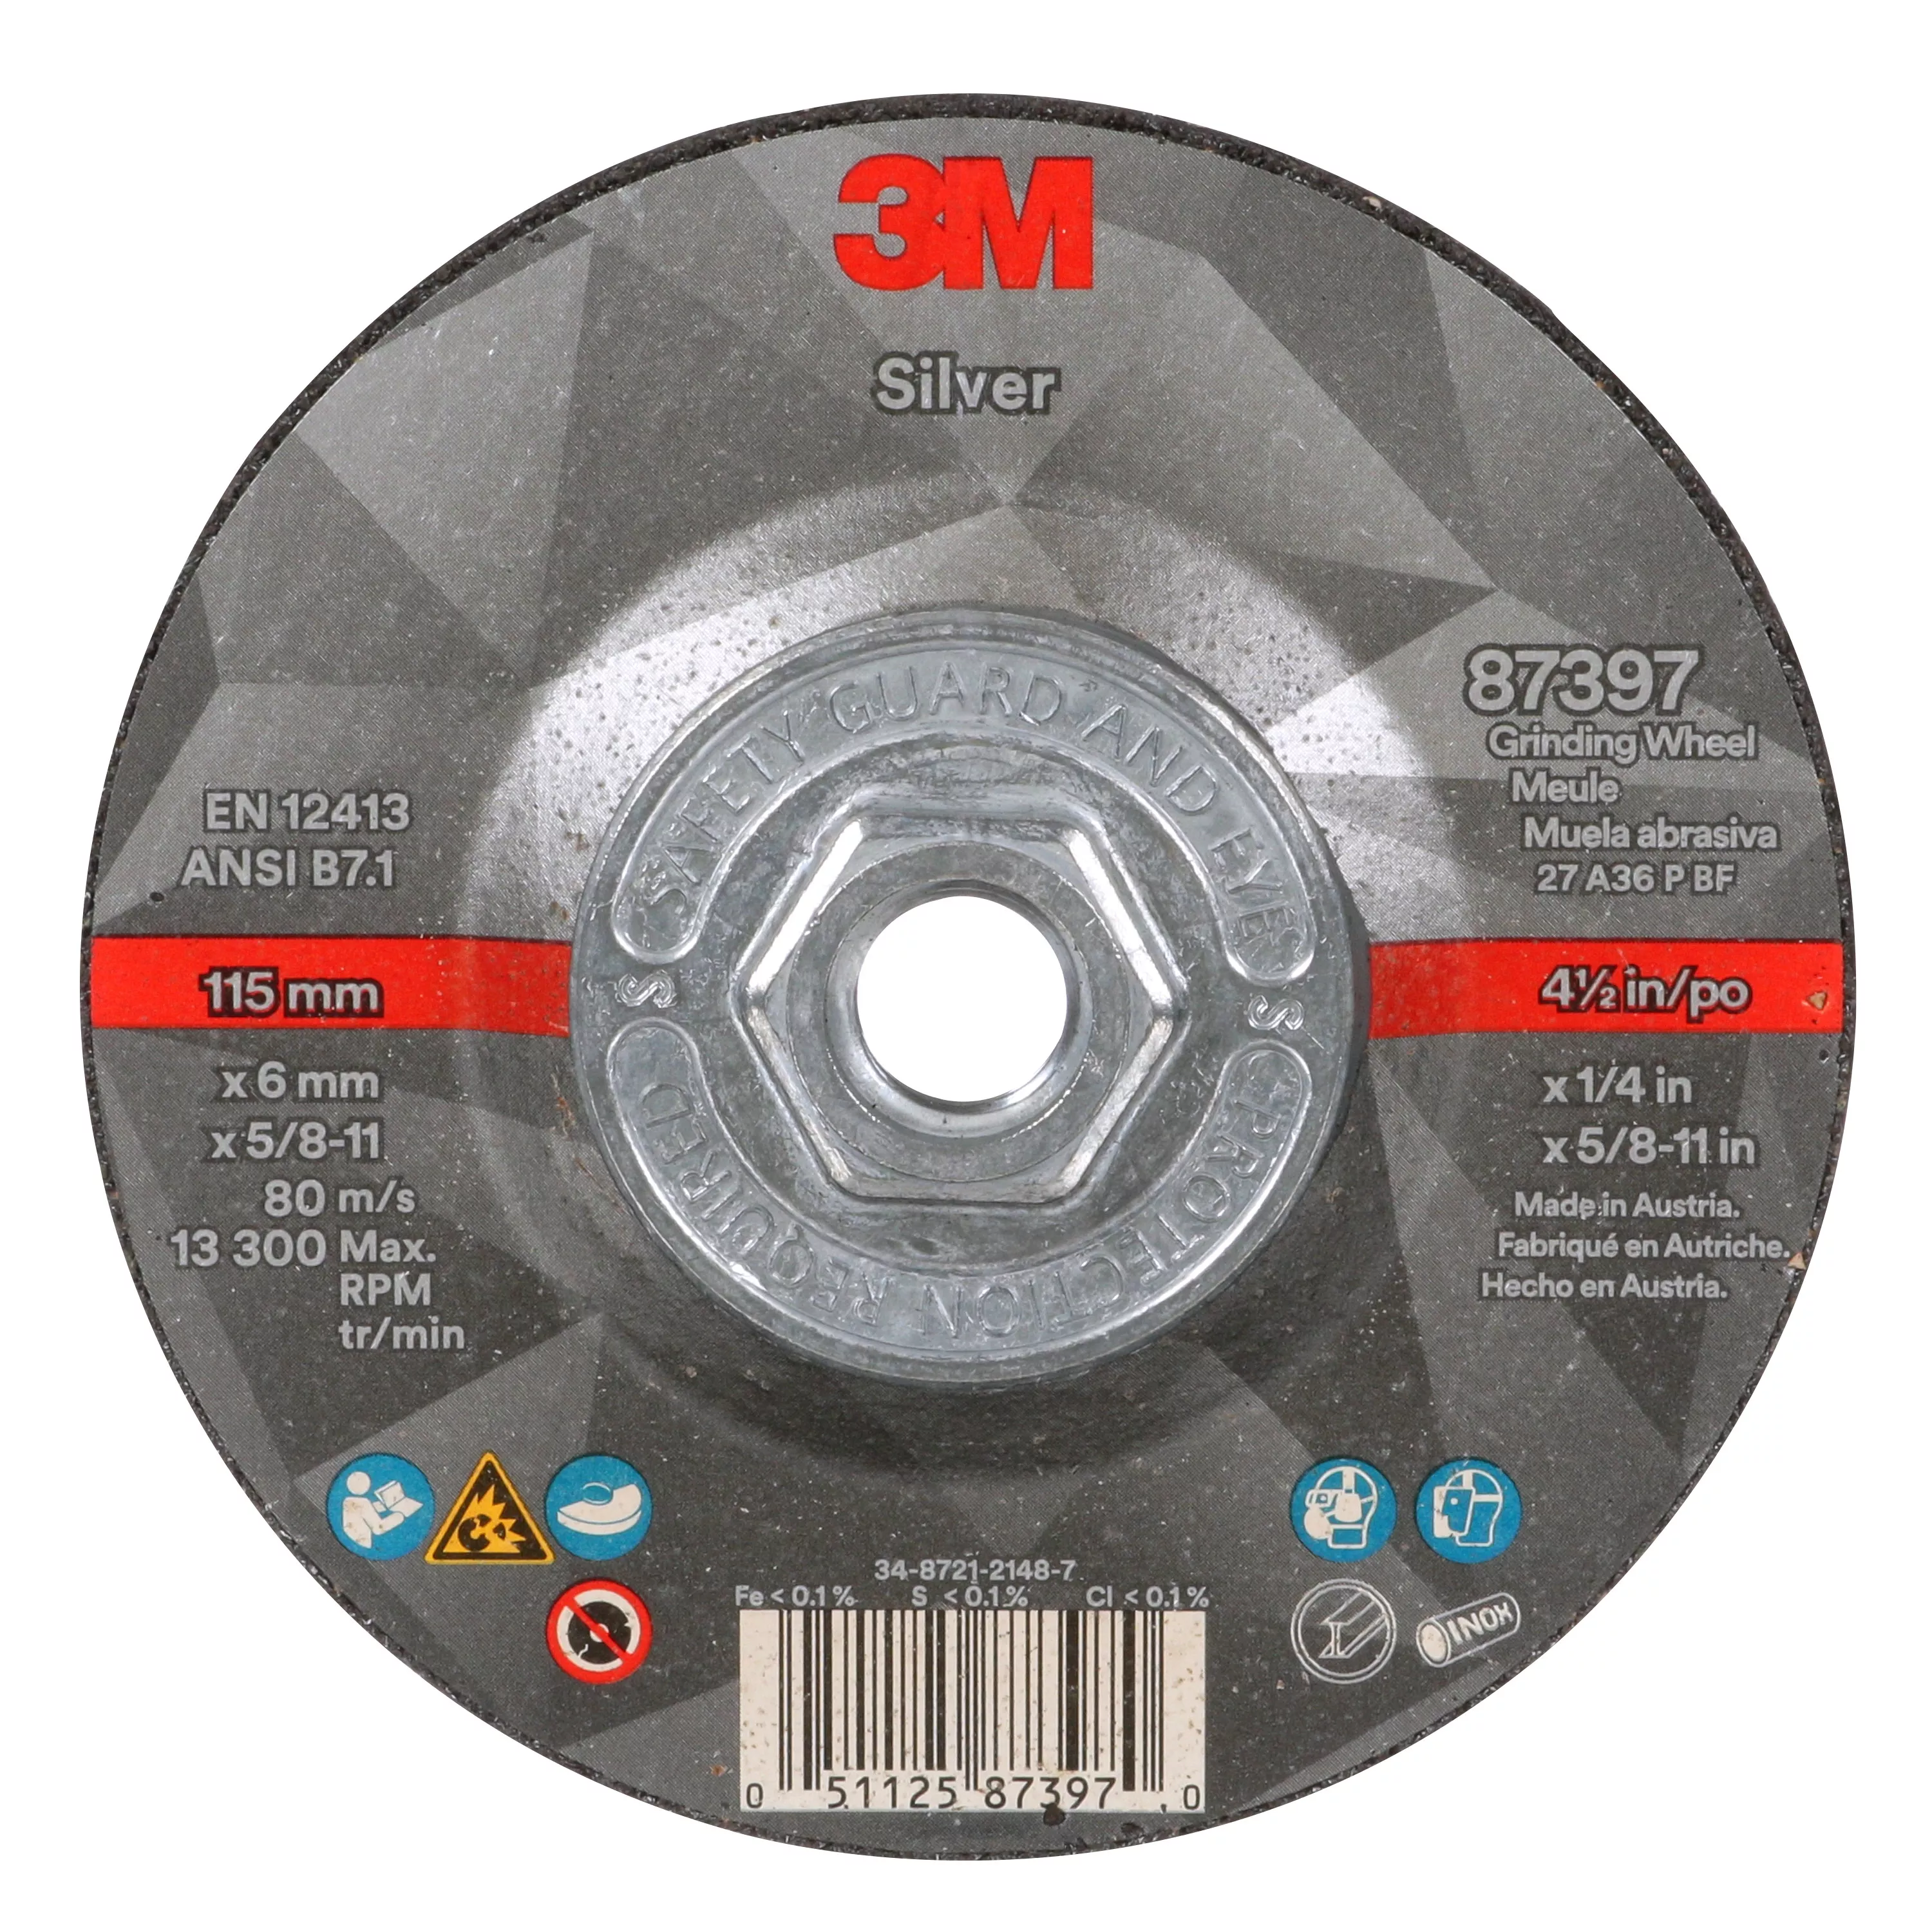 3M™ Silver Depressed Center Grinding Wheel, 87397, T27 Quick Change, 4.5
in x 1/4 in x 5/8 in-11 in, 10/Carton, 20 ea/Case